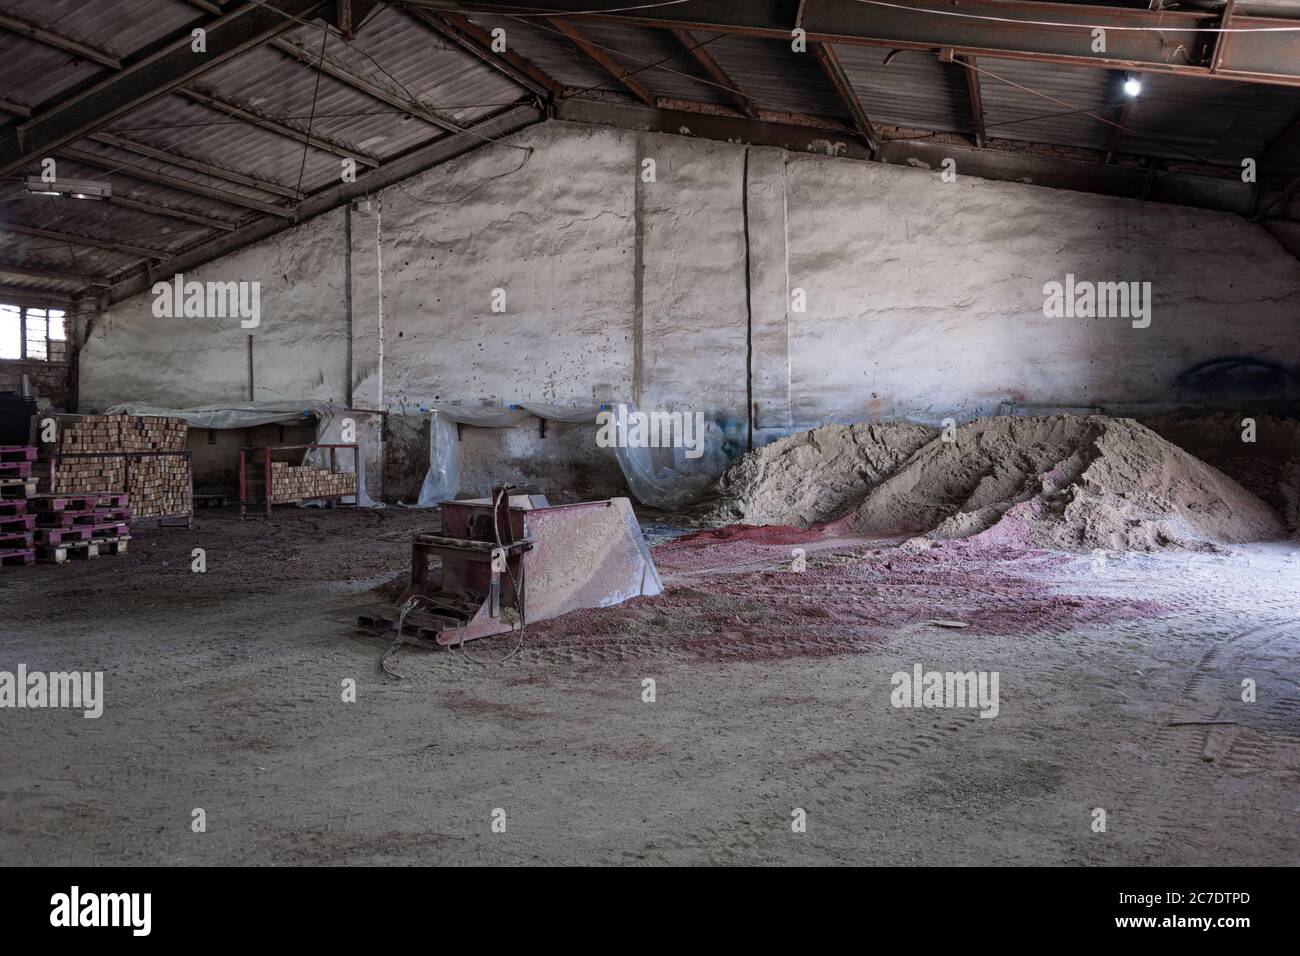 Sand and paint for paving slabs are scattered on the floor in the paving slab production workshop. Stock Photo